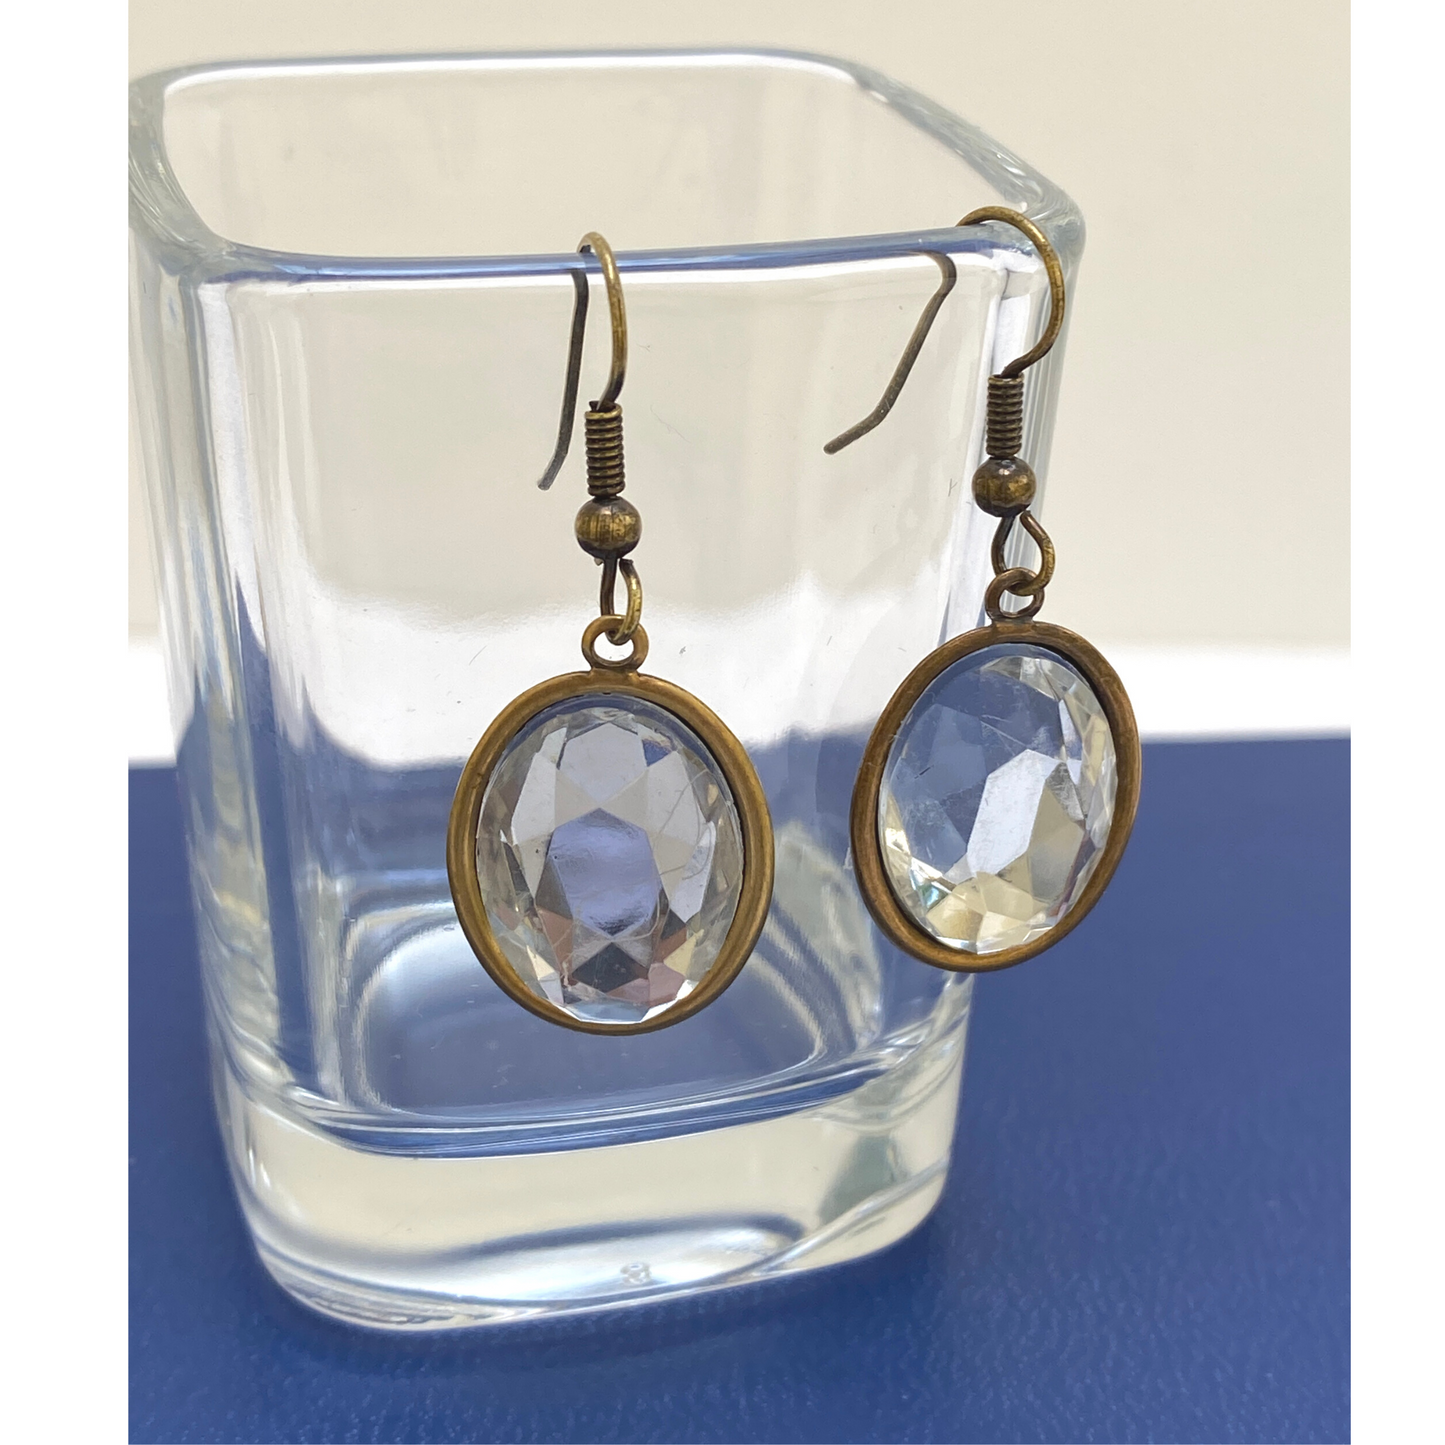 Earring, Antique Gold, Clear Crystal Cabochon, Handmade in USA